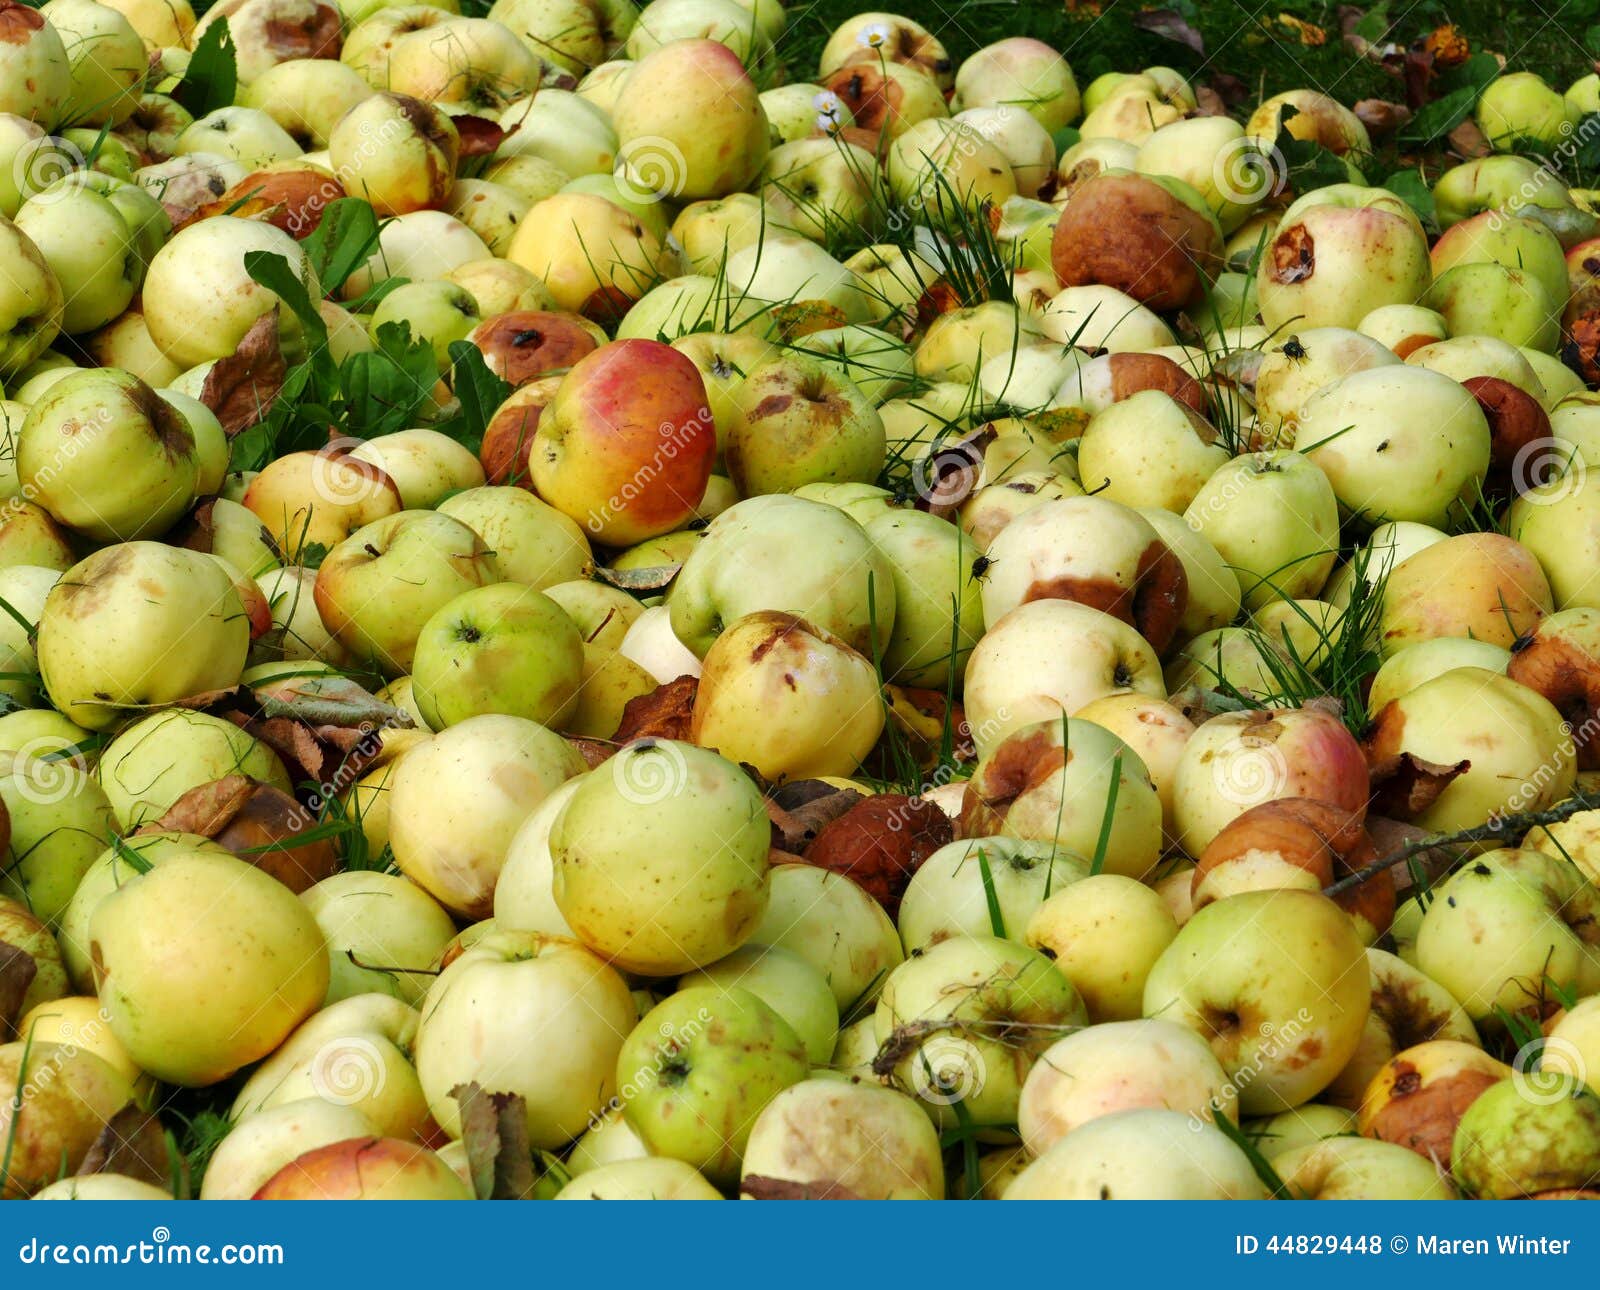 food overproduction, apples rot on the garbage dump